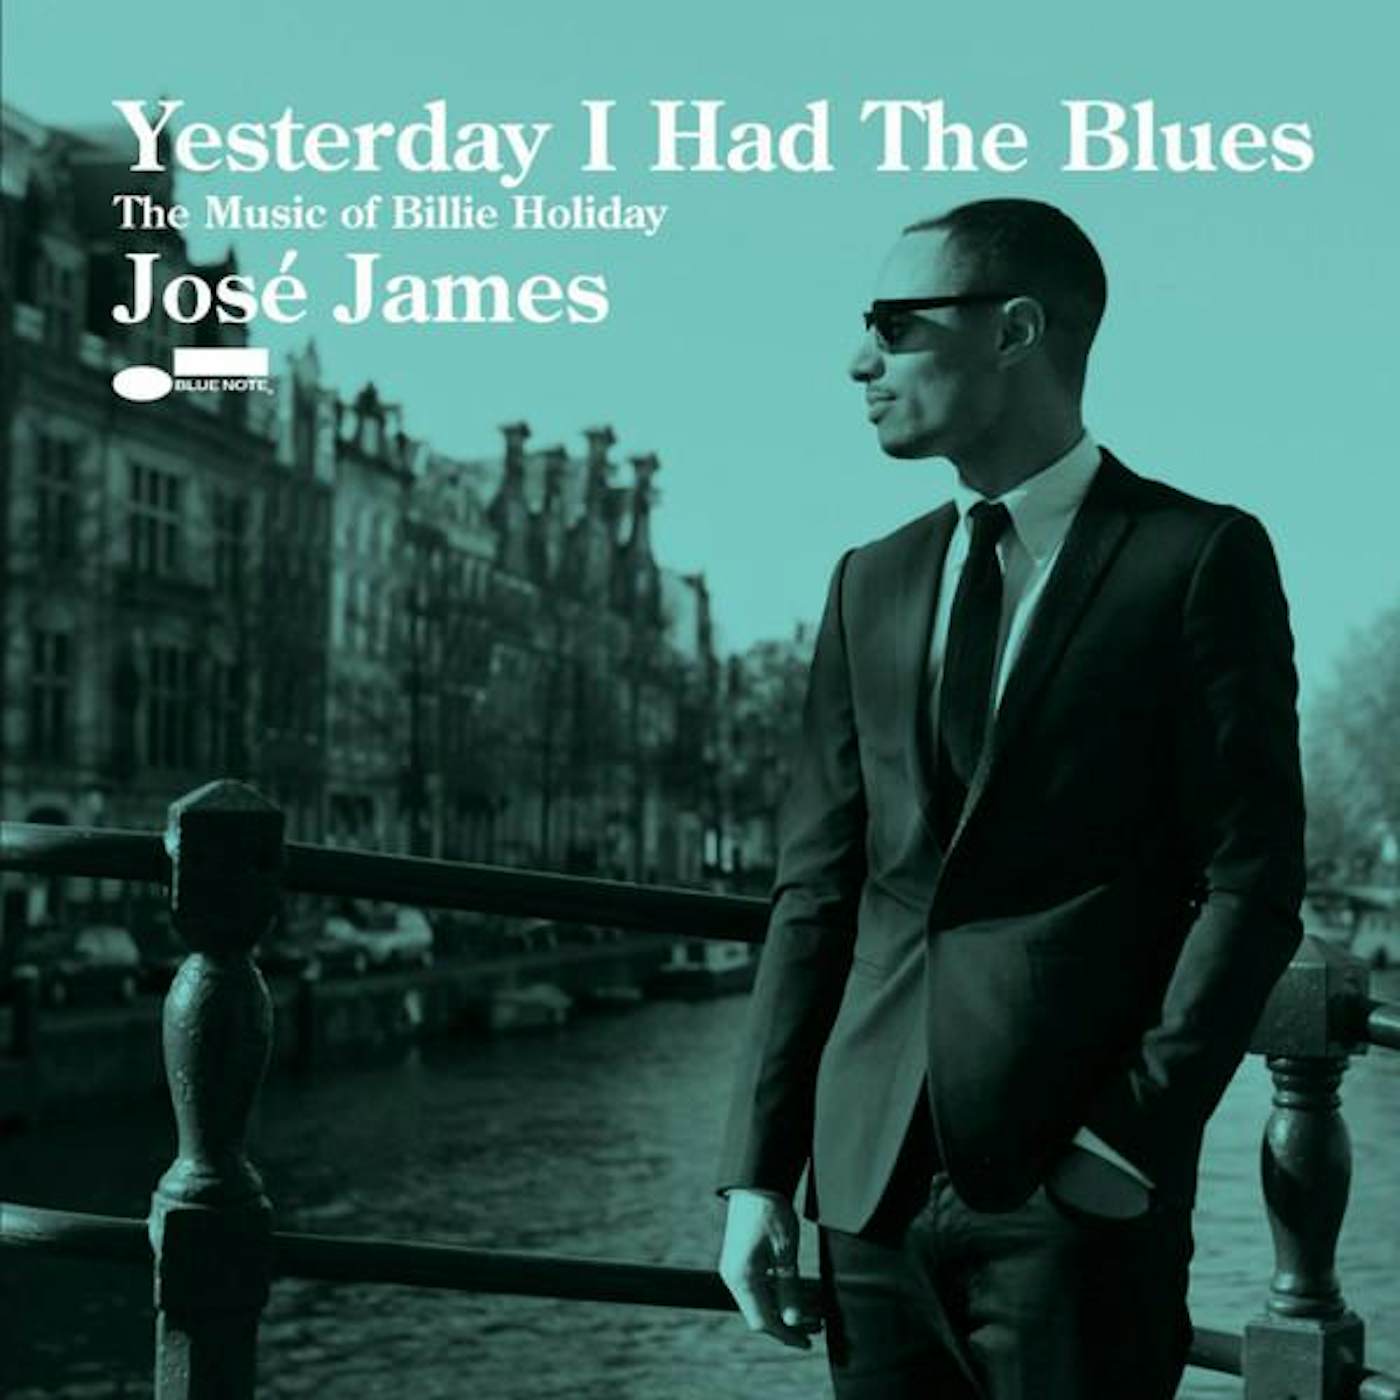 Jose James YESTERDAY I HAD THE BLUES: MUSIC OF BILLIE HOLIDAY CD